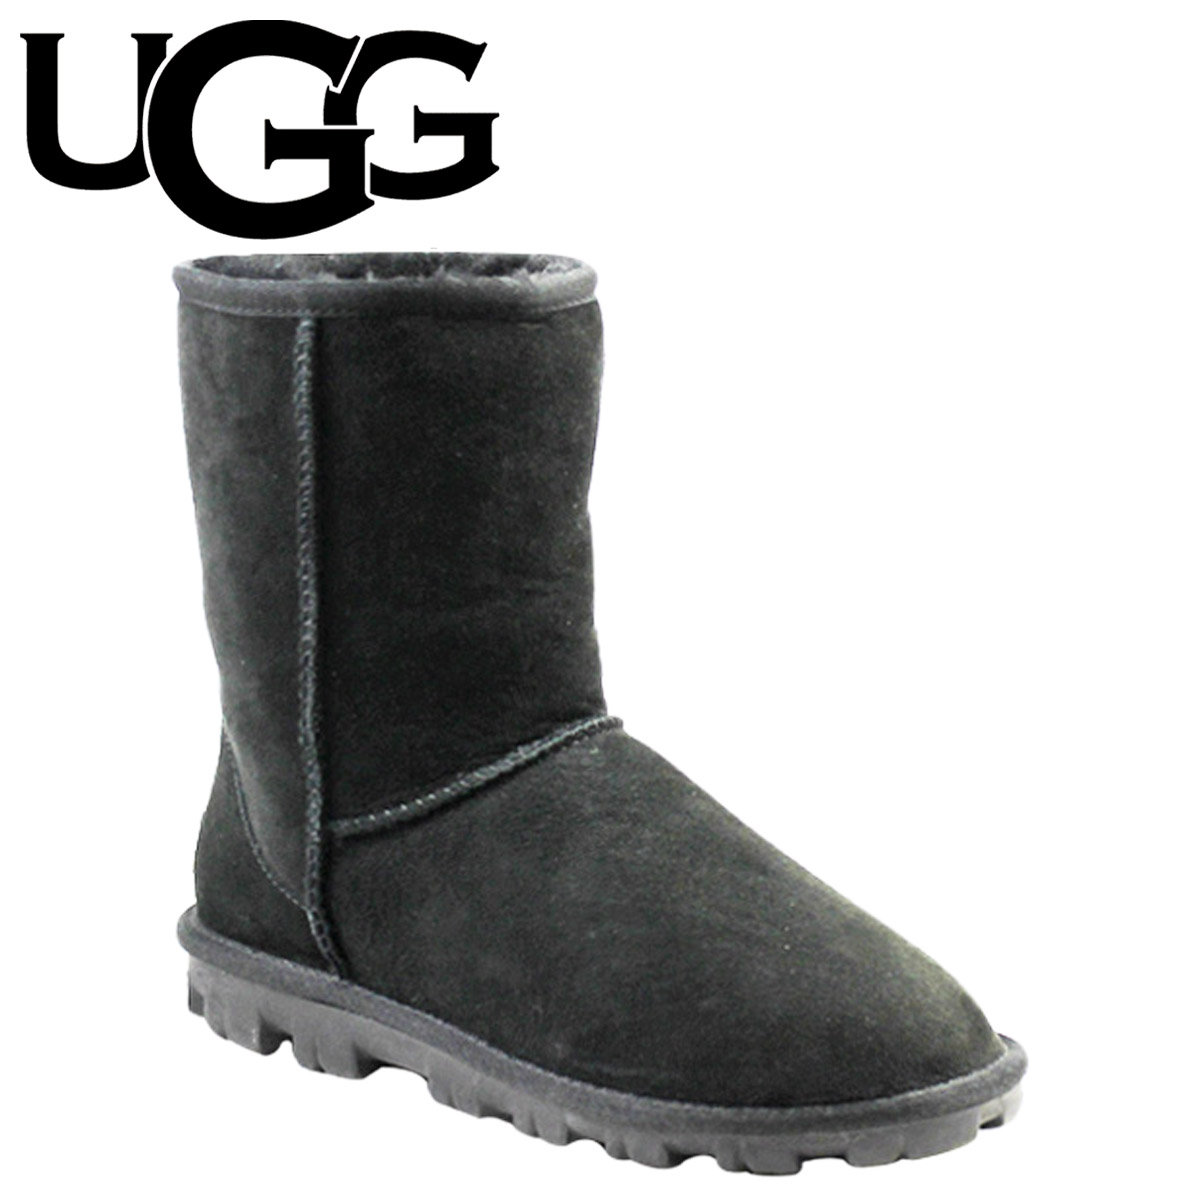 ugg sold out